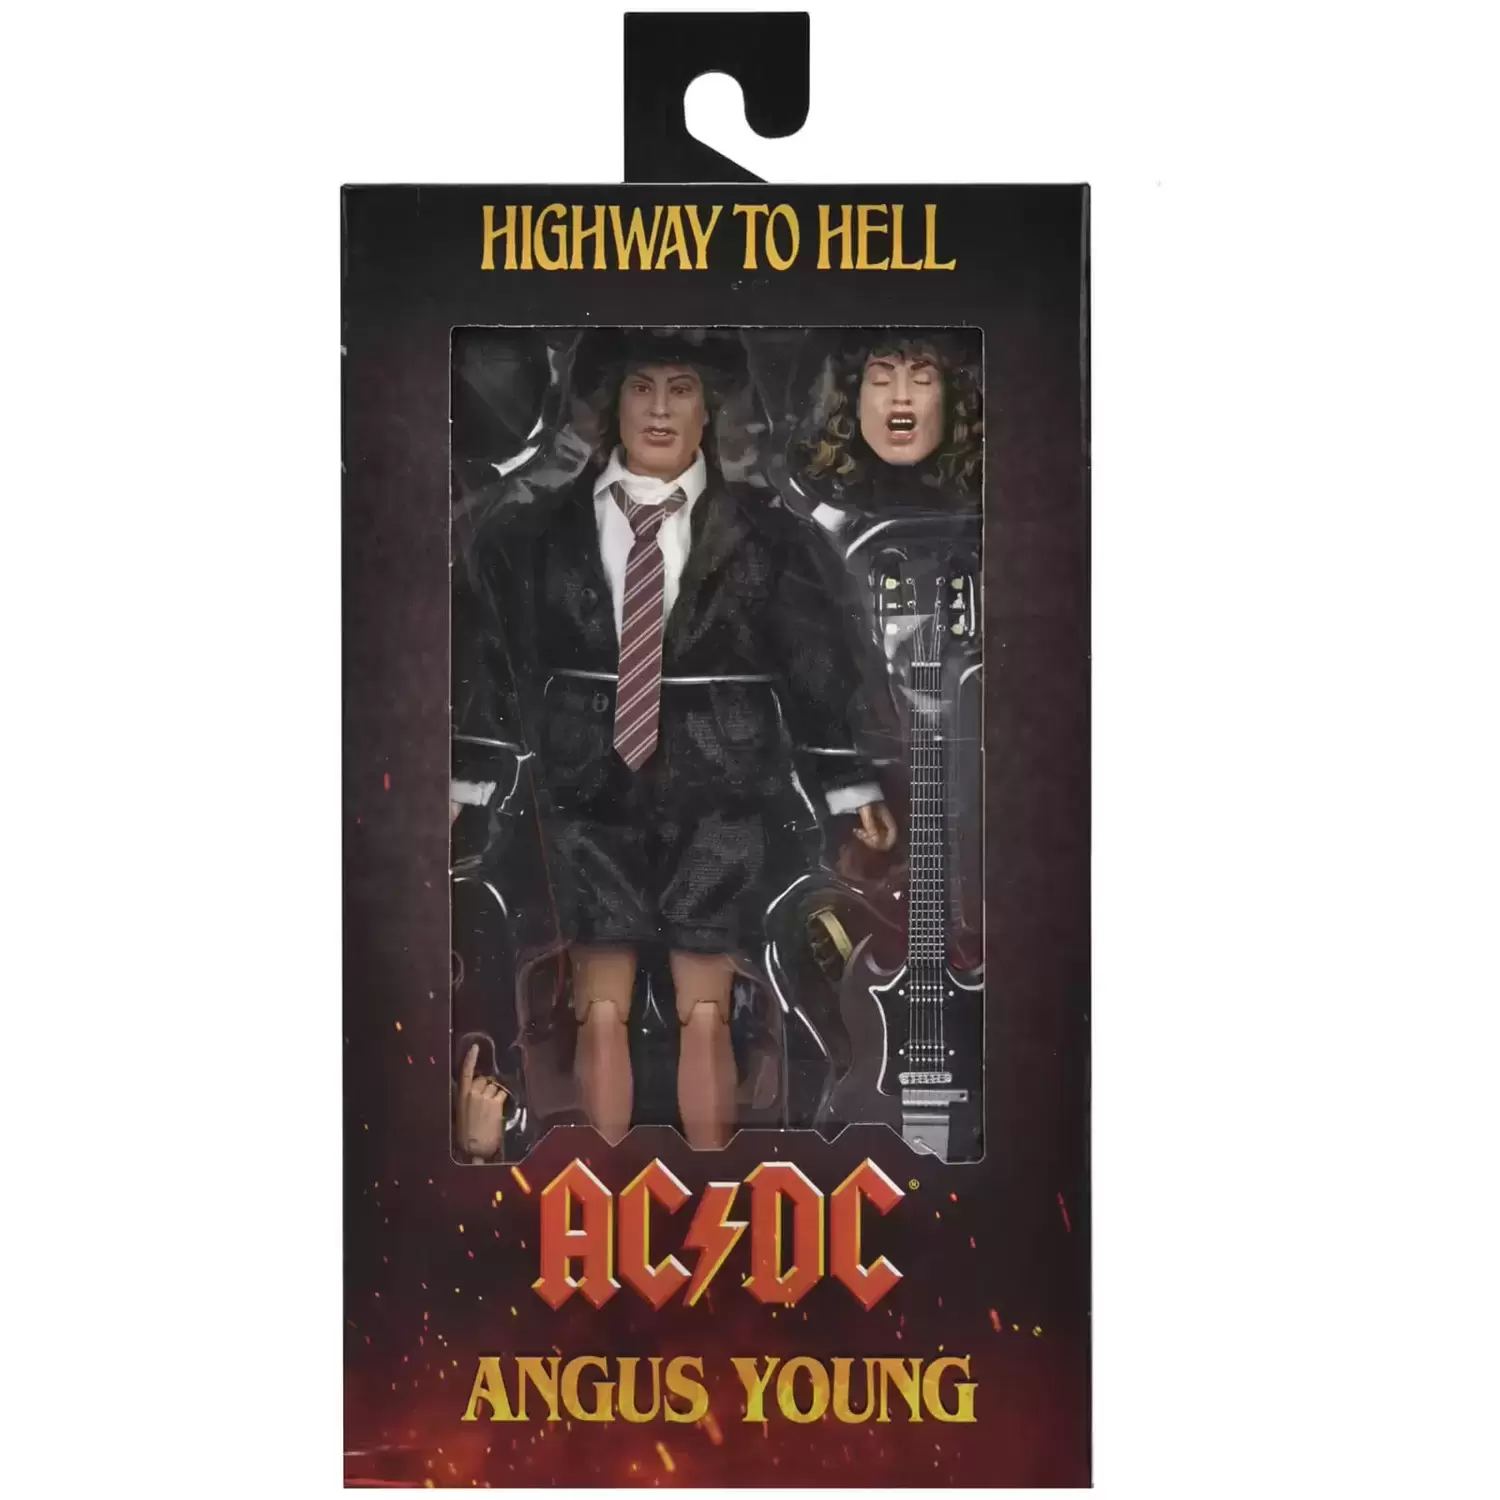 NECA - AC/DC - Angus Young Highway to Hell Clothed